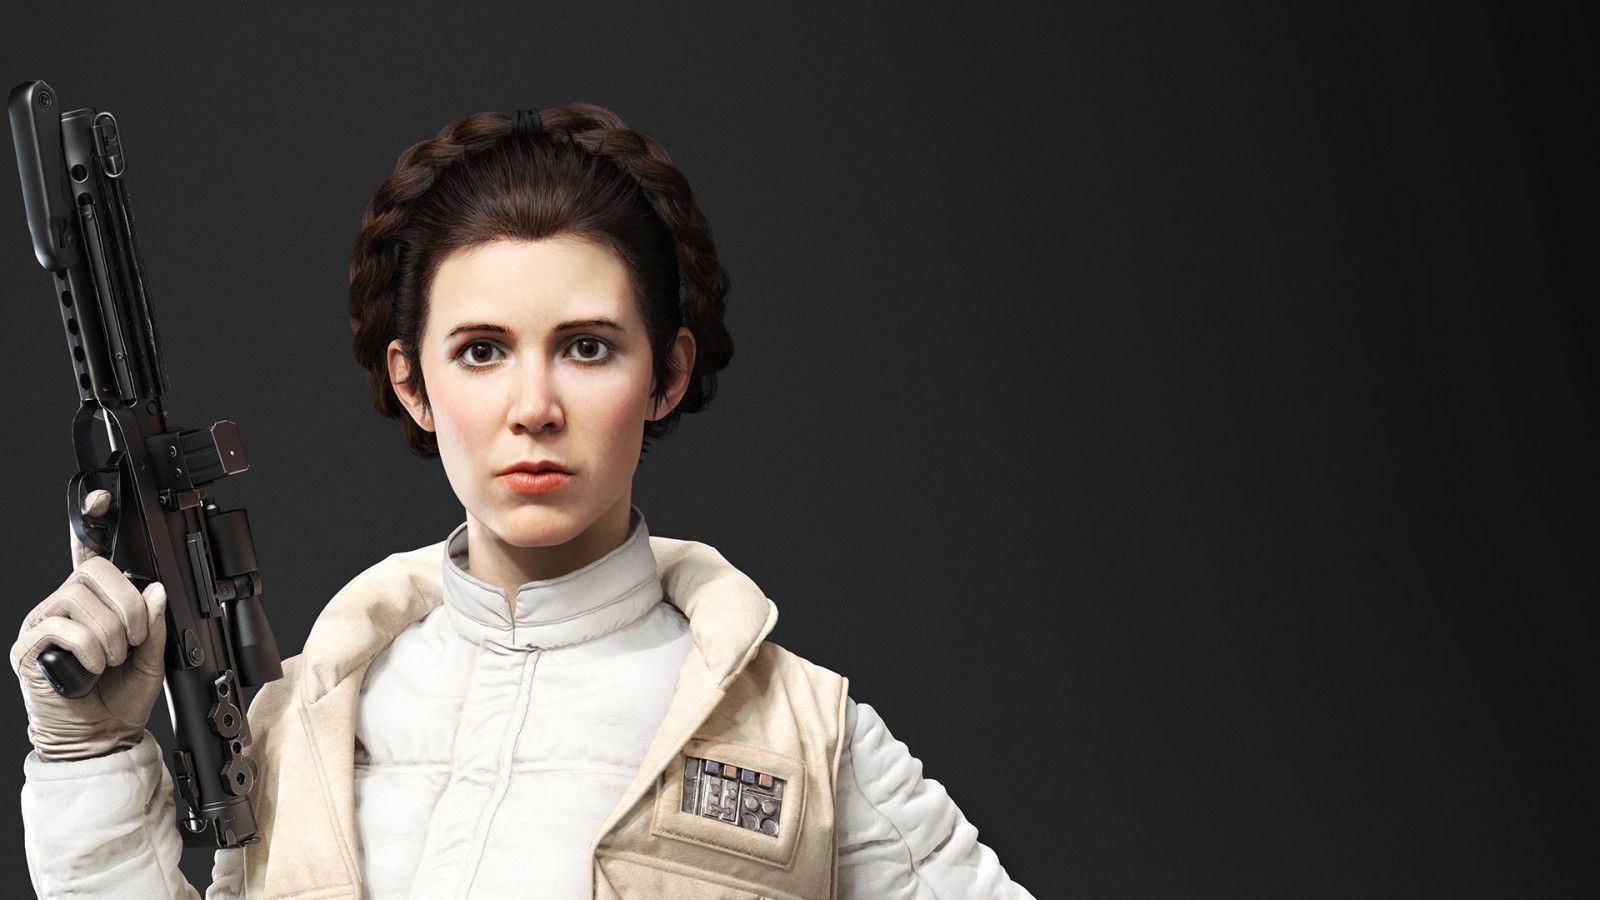 Tons of awesome Star Wars Battlefront Leia Organa wallpapers to download fo...